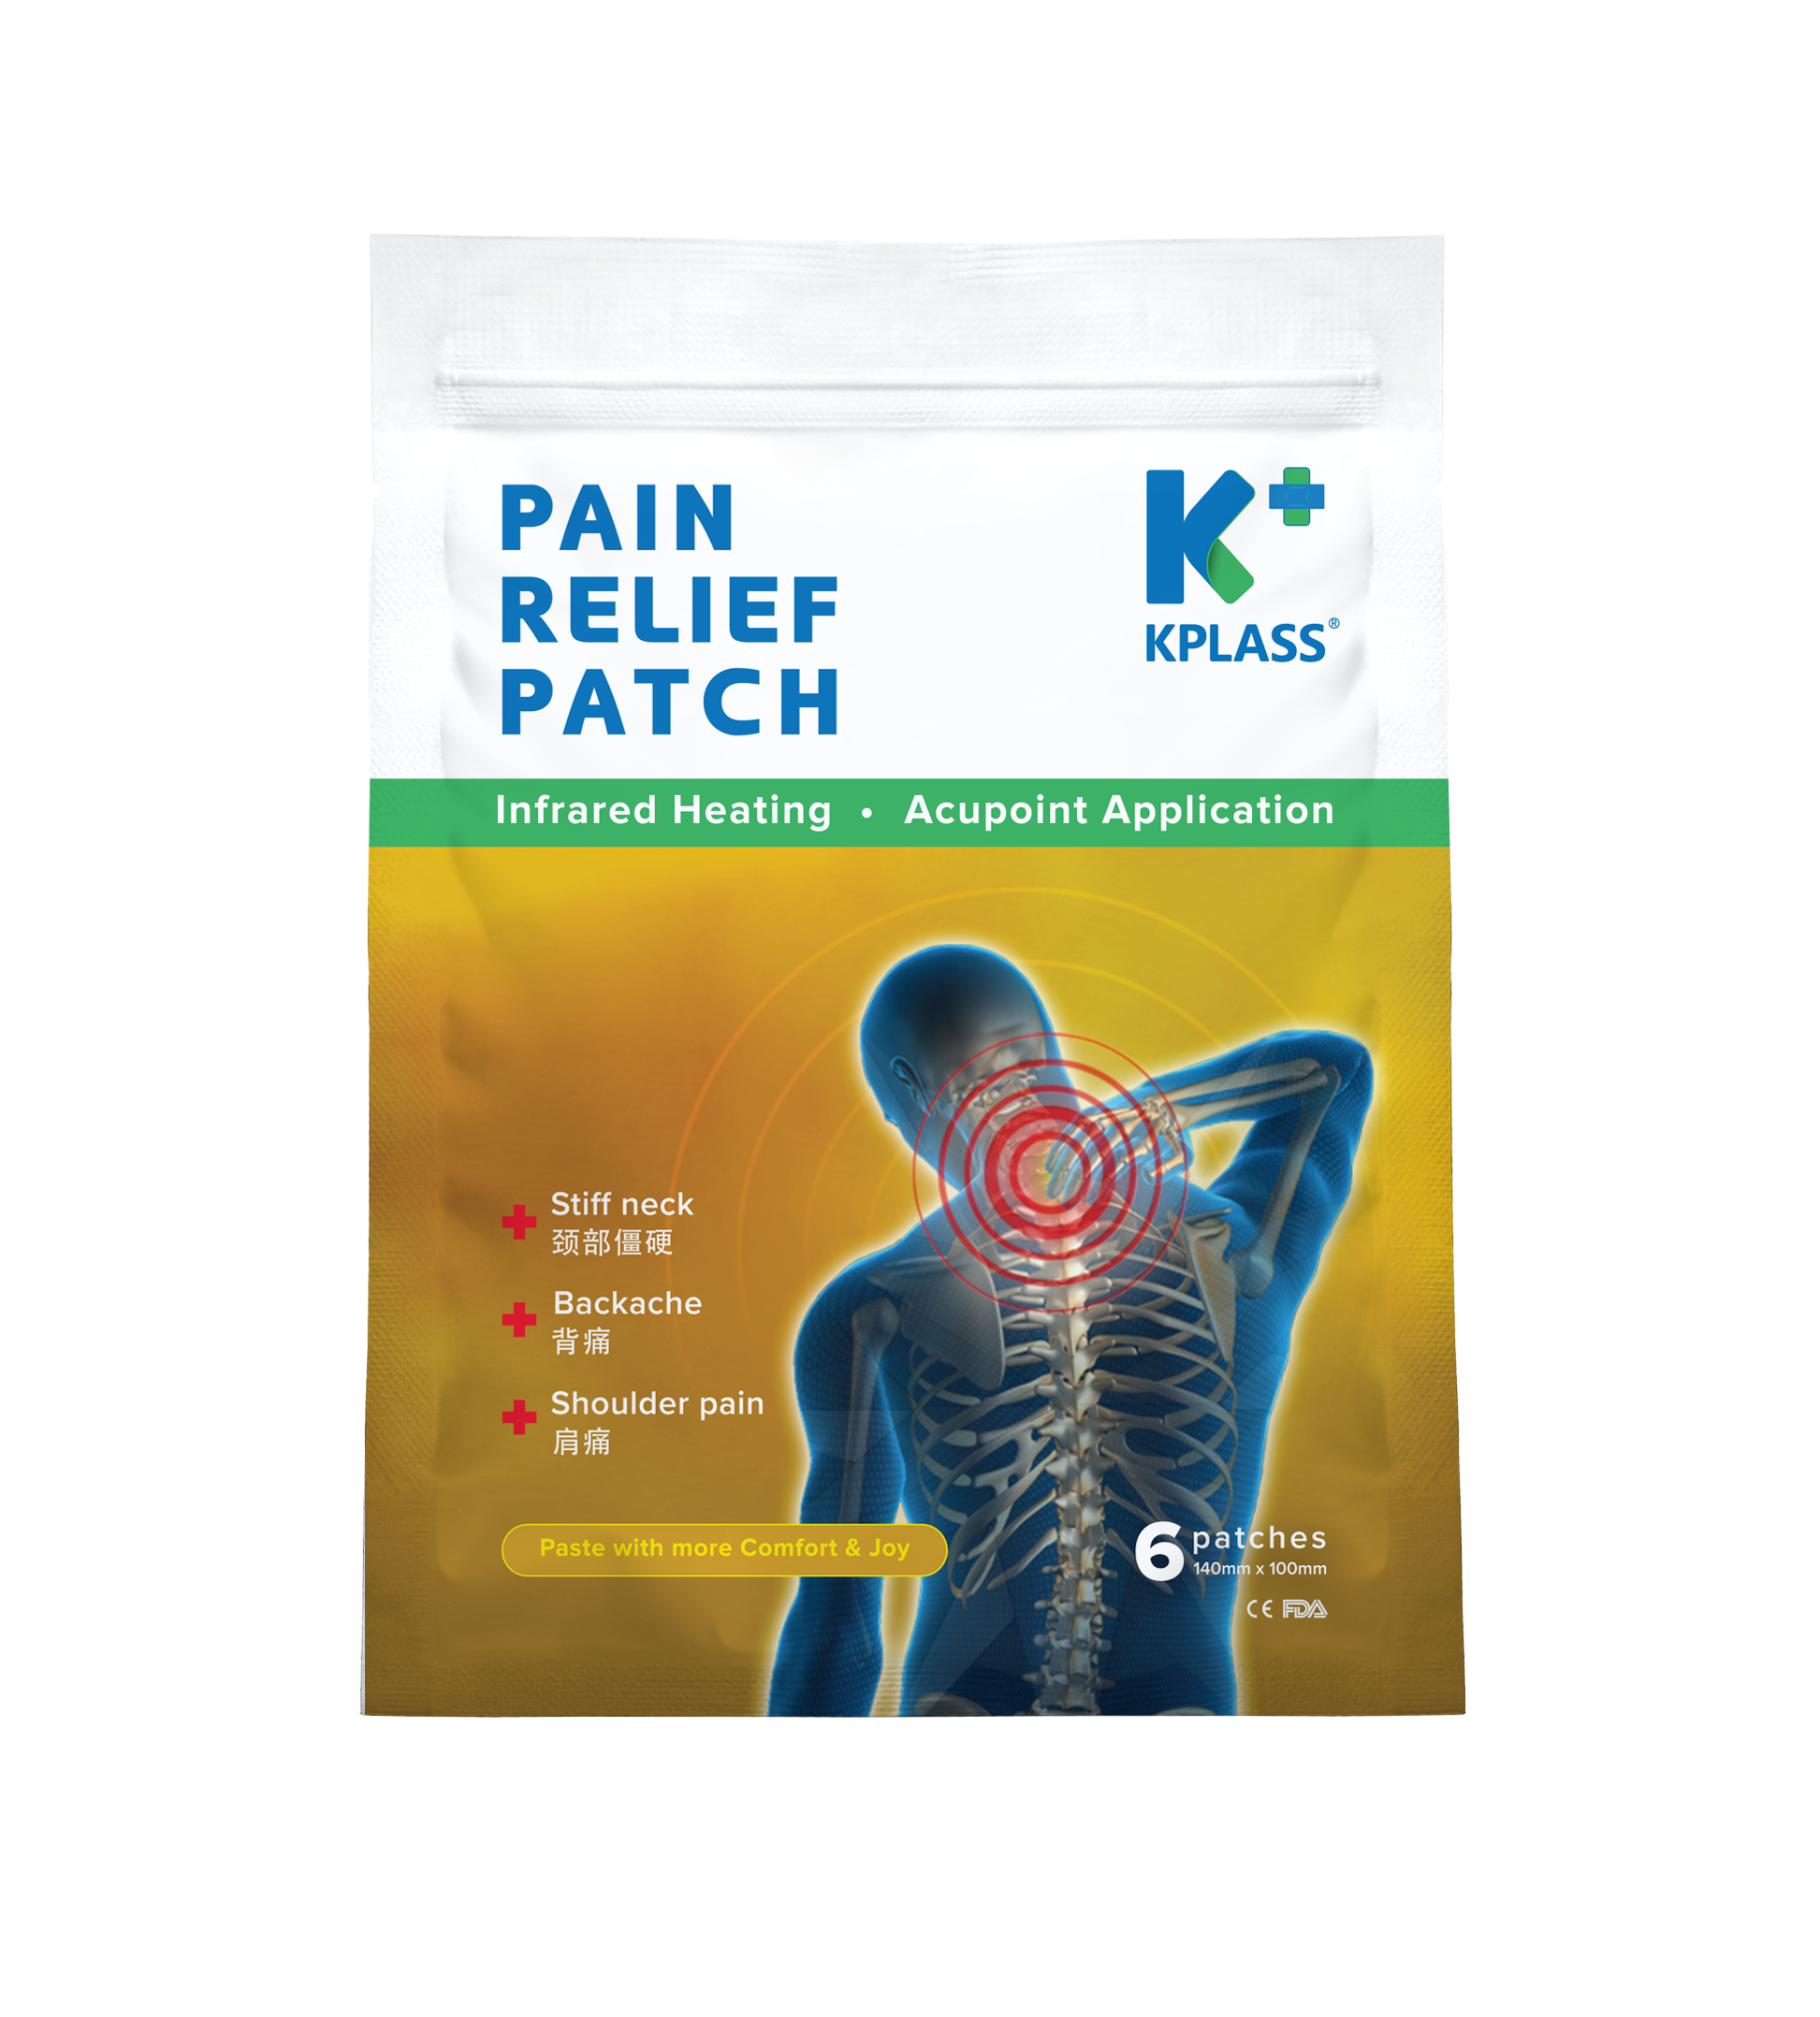 KPLASS Pain Relief Patch (6 Patches)